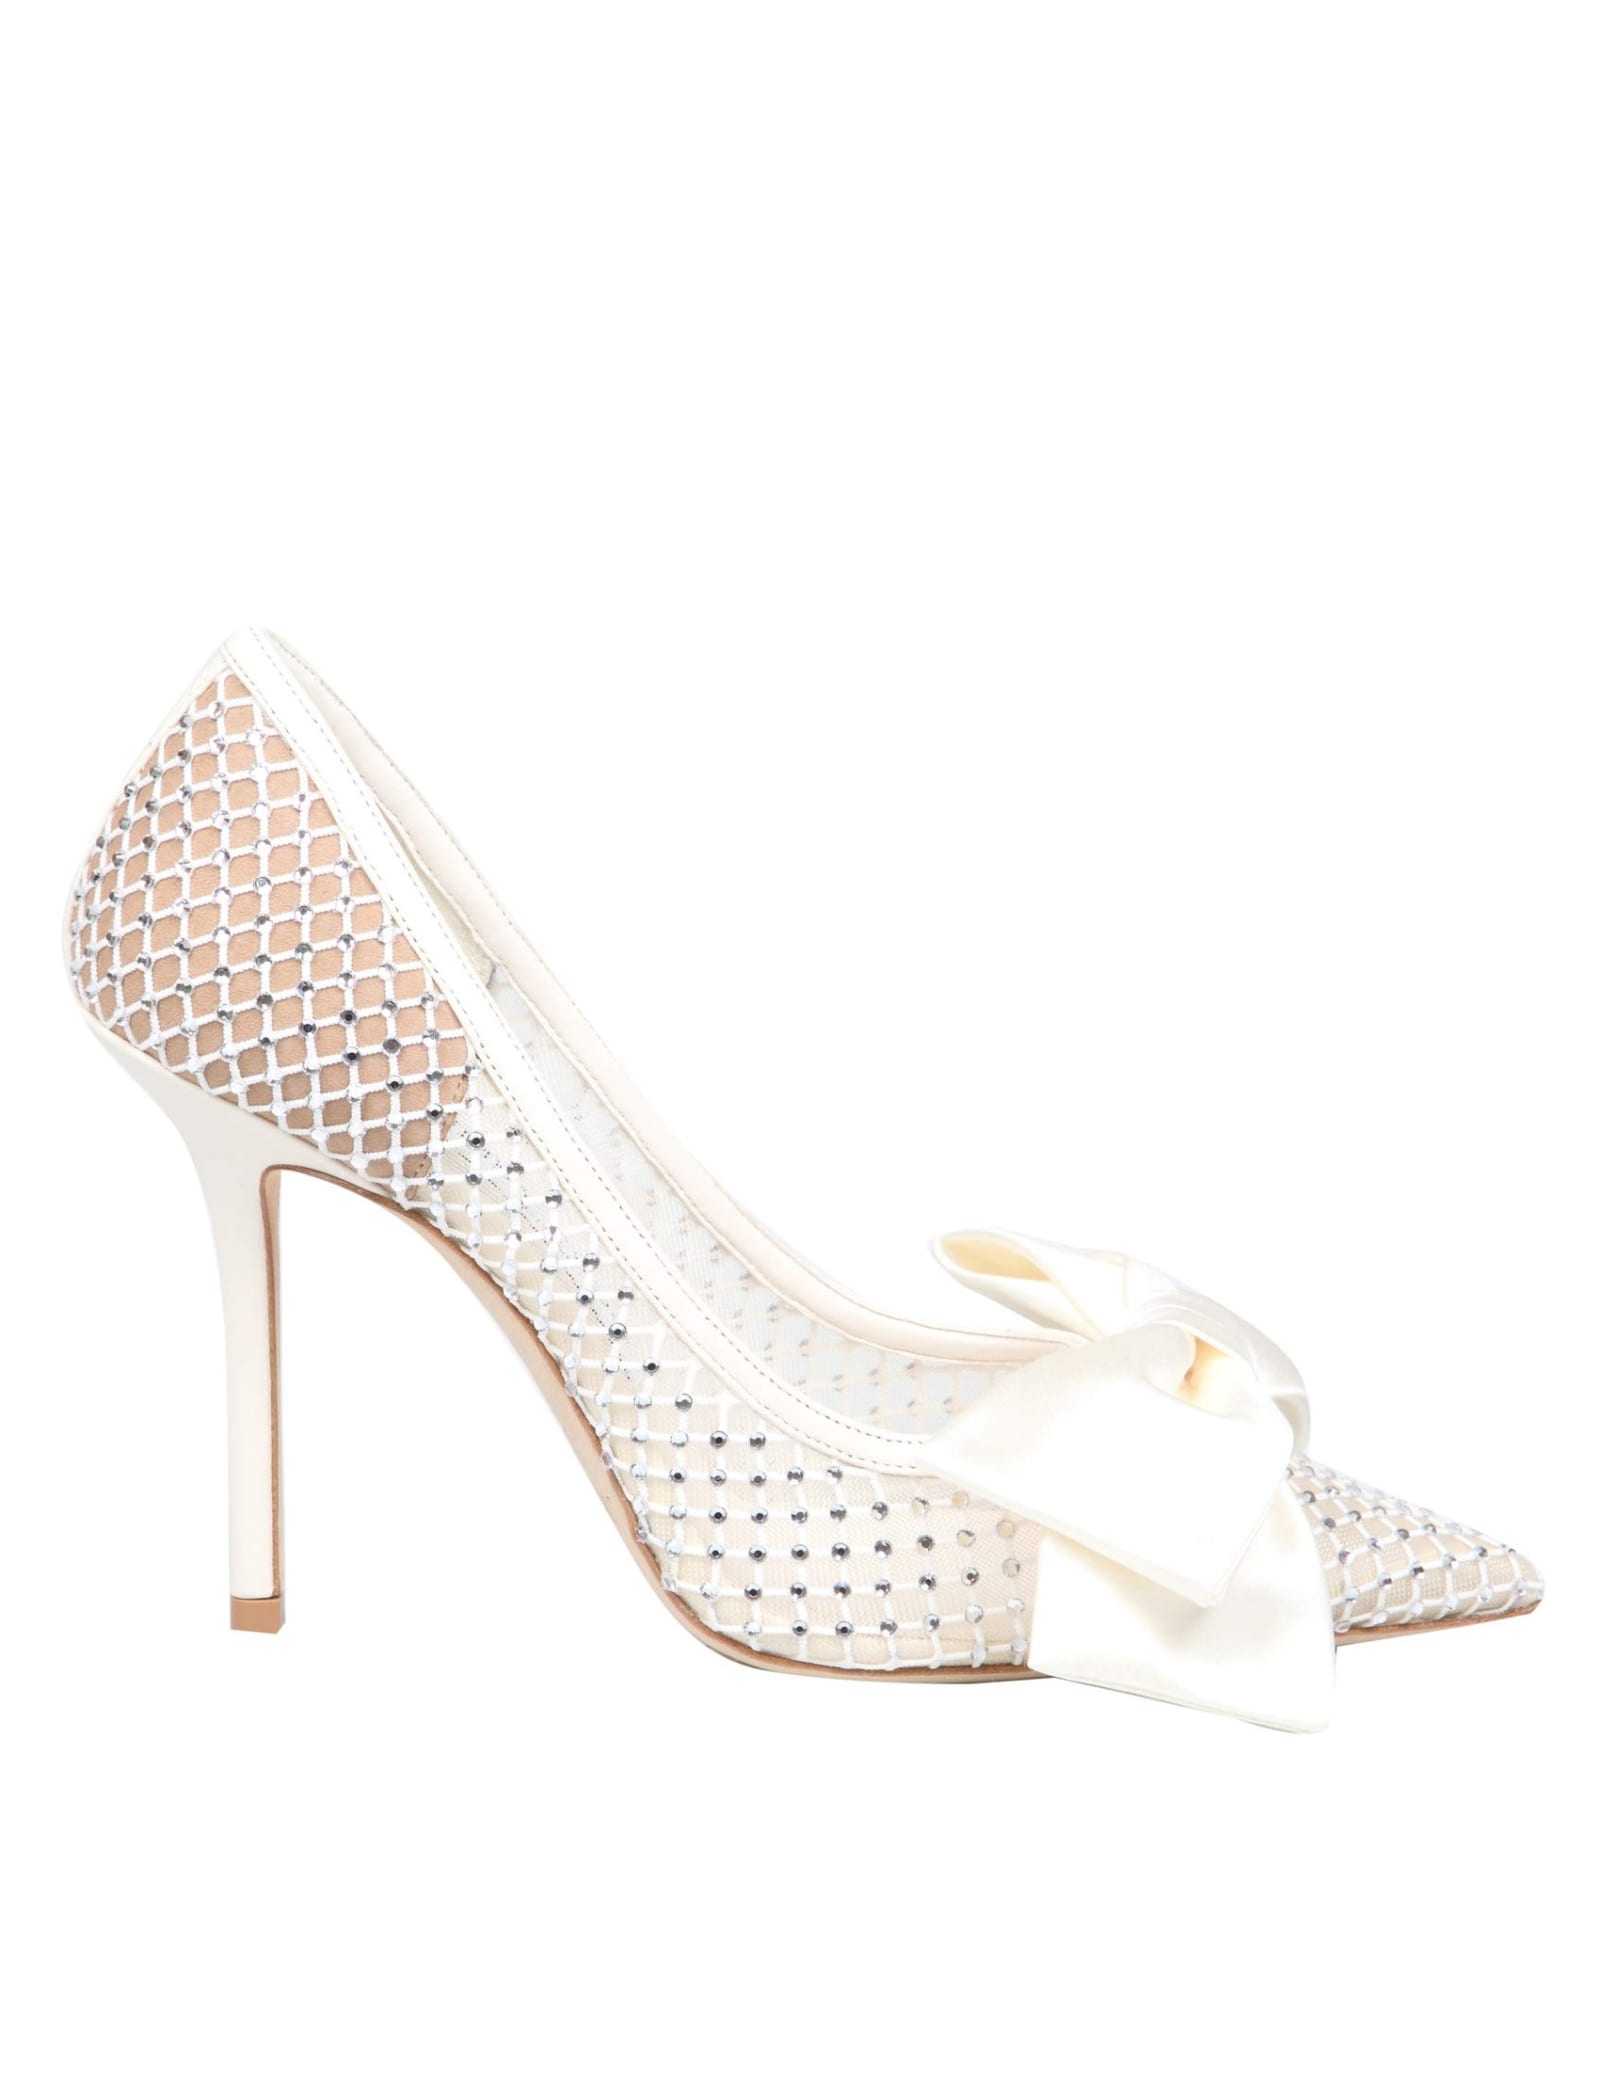 Jimmy Choo Lobe 100 Pumps In Mesh With Applied Crystals